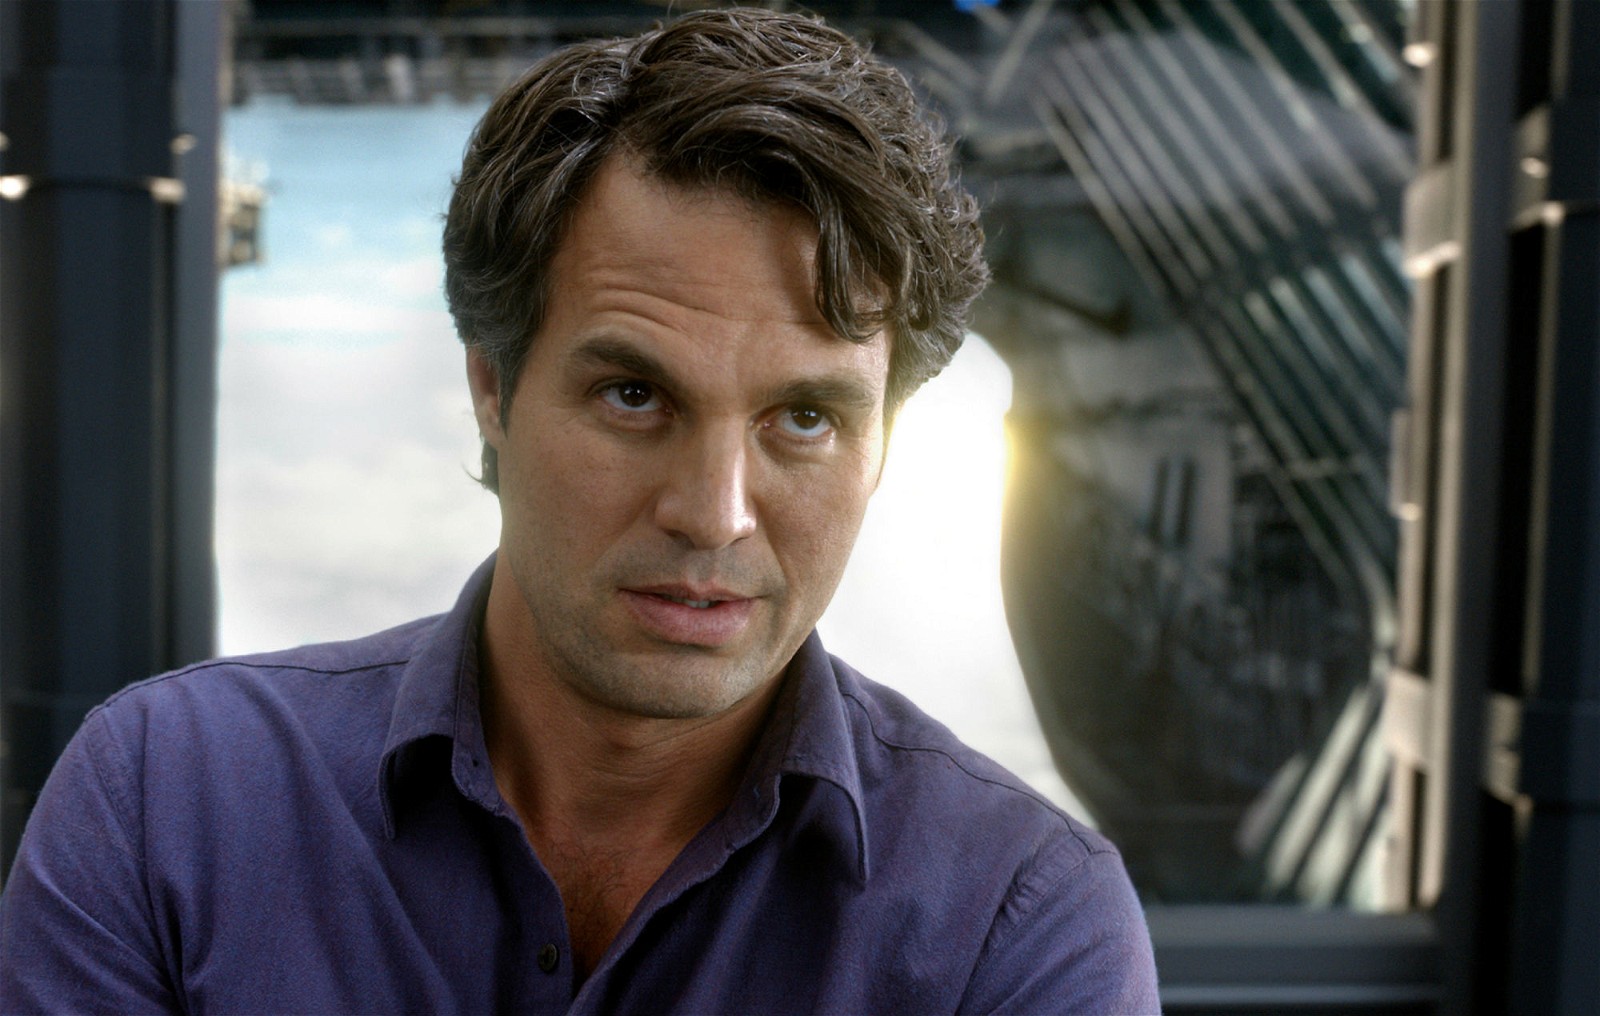 Mark Ruffalo is known for portraying Hulk in the MCU.